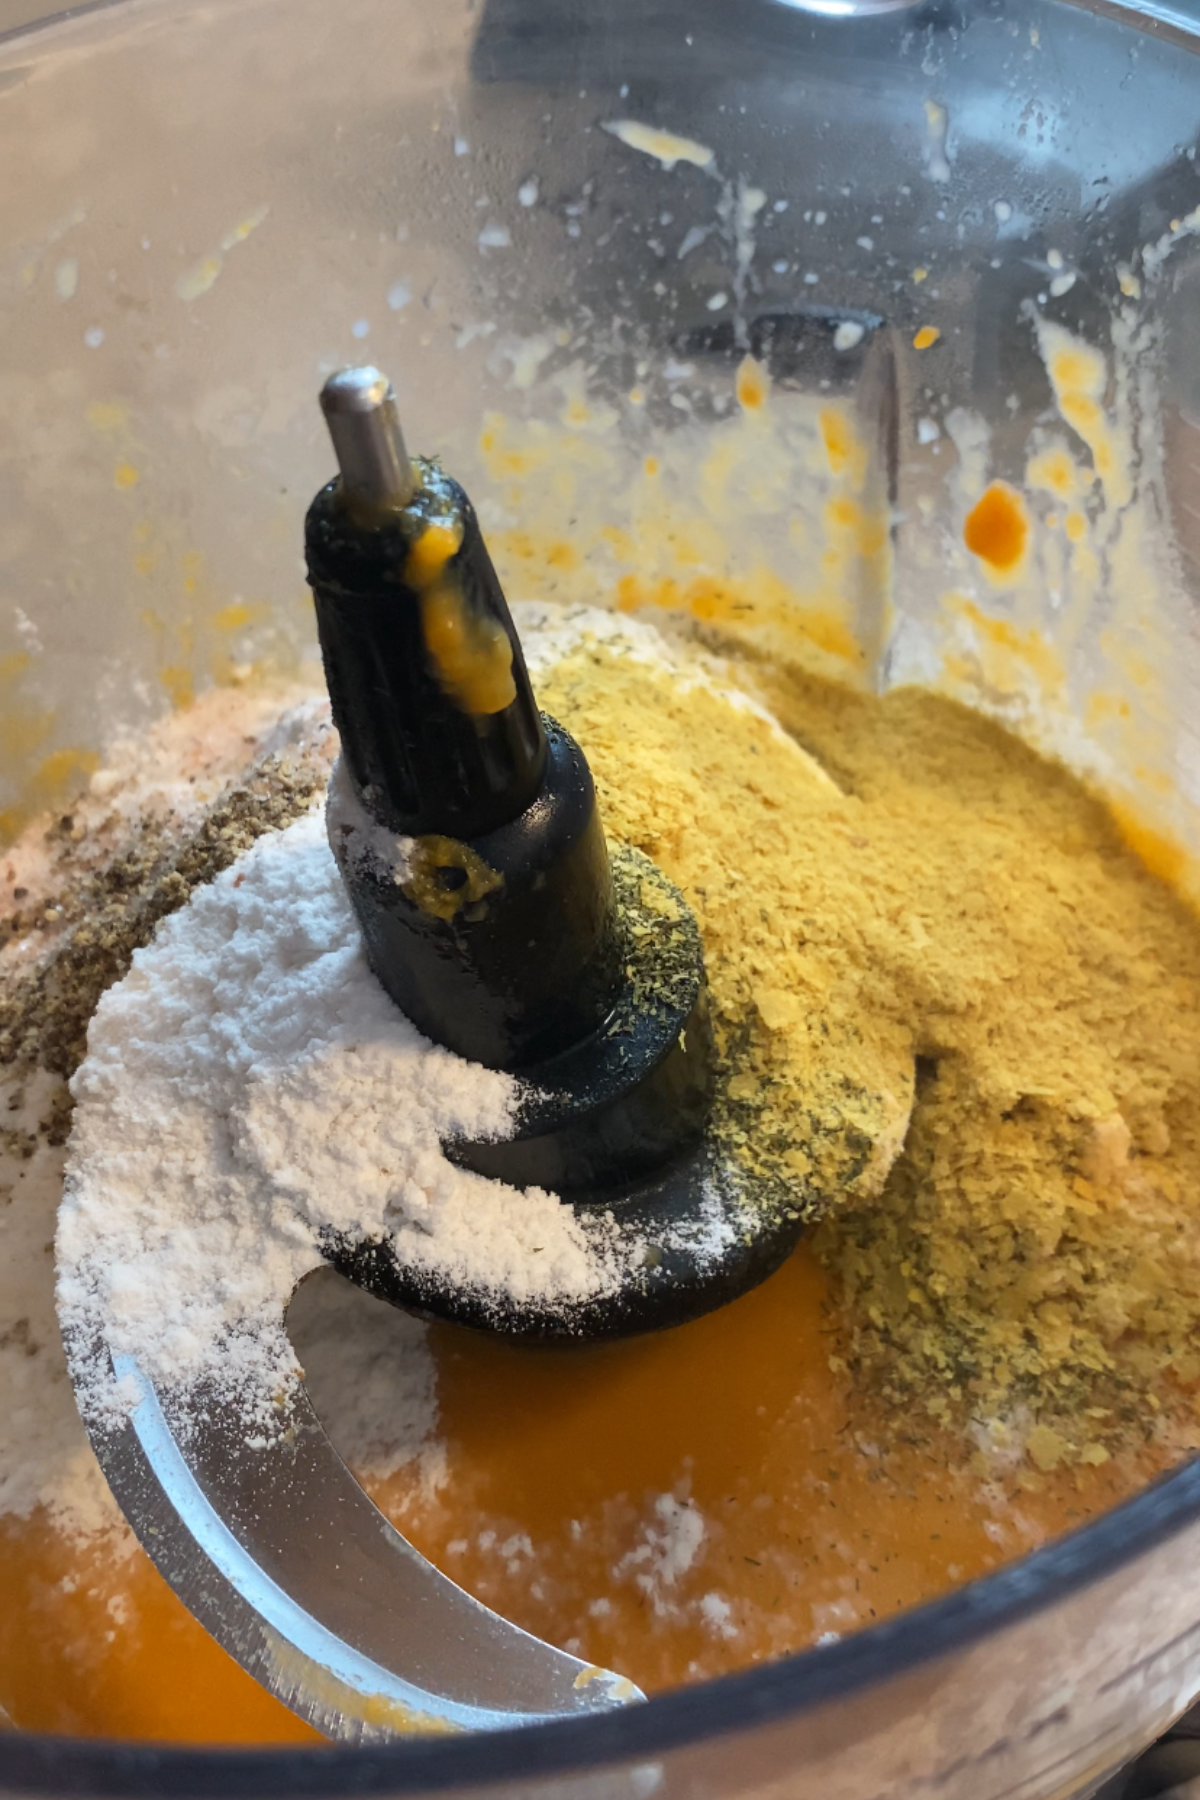 Dry ingredients in a food processor.